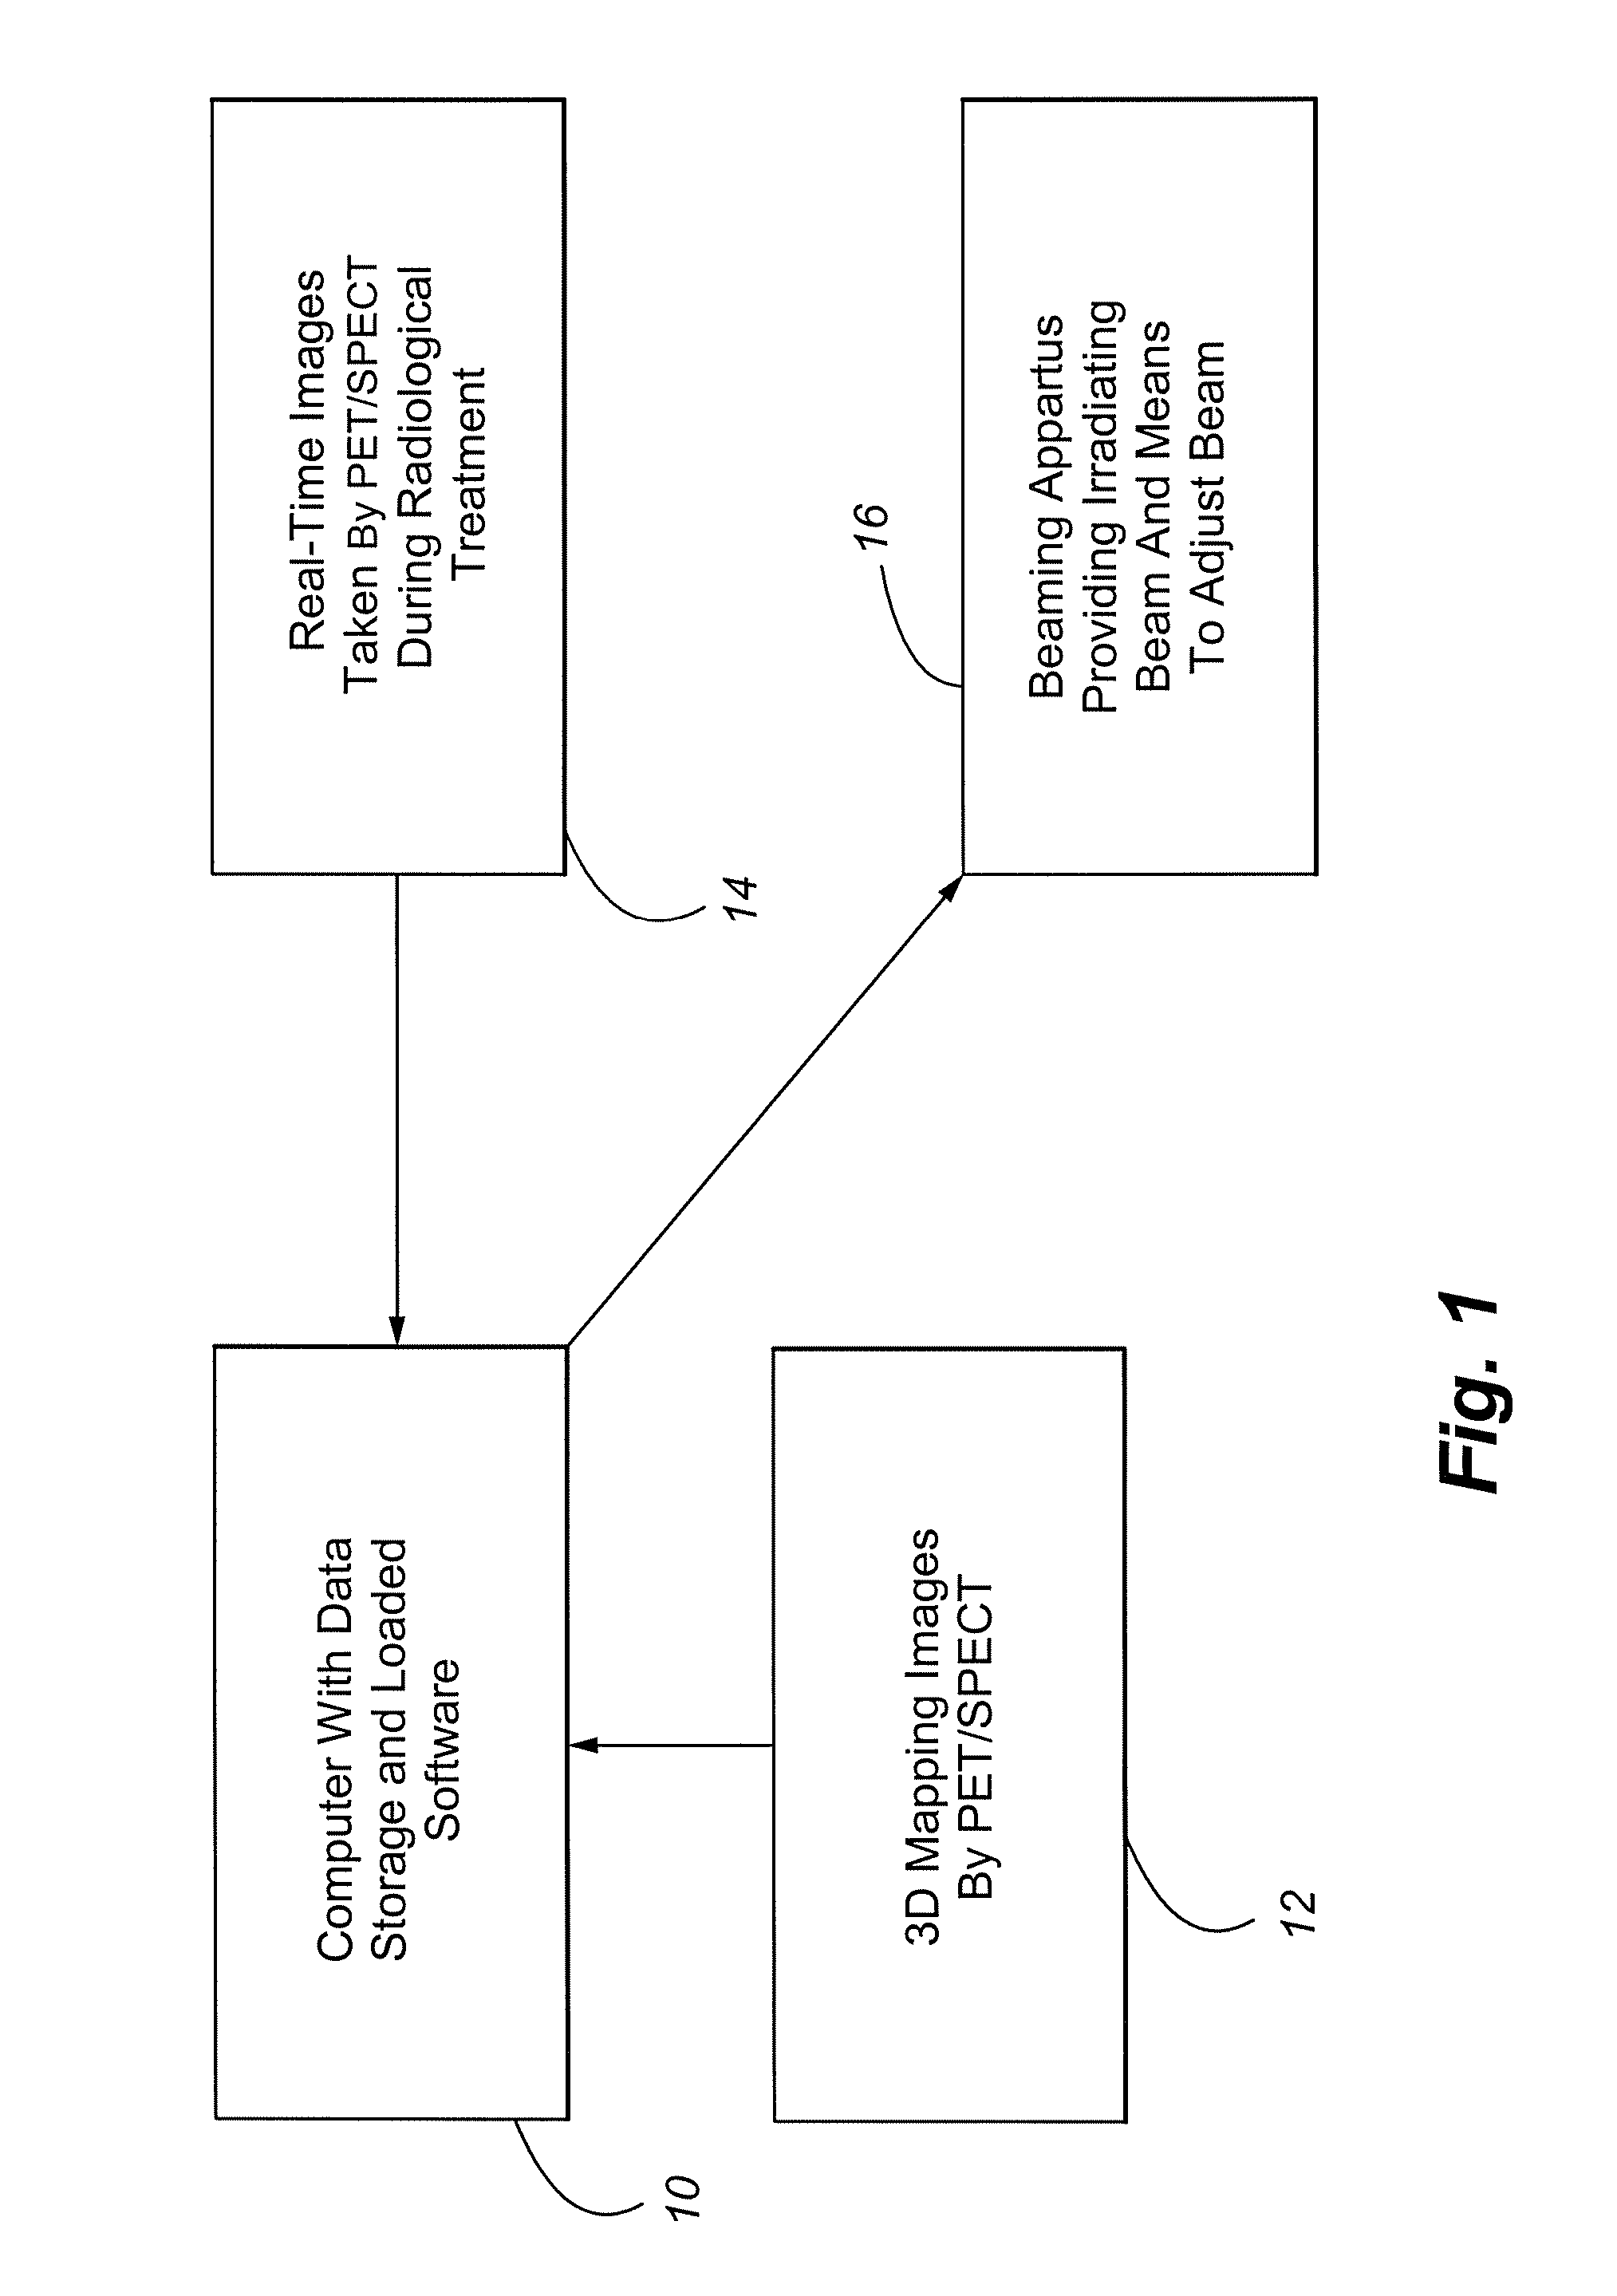 Method and Apparatus Including Use of Metalloporphyrins for Subsequent Optimization of Radiosurgery and Radiotherapy